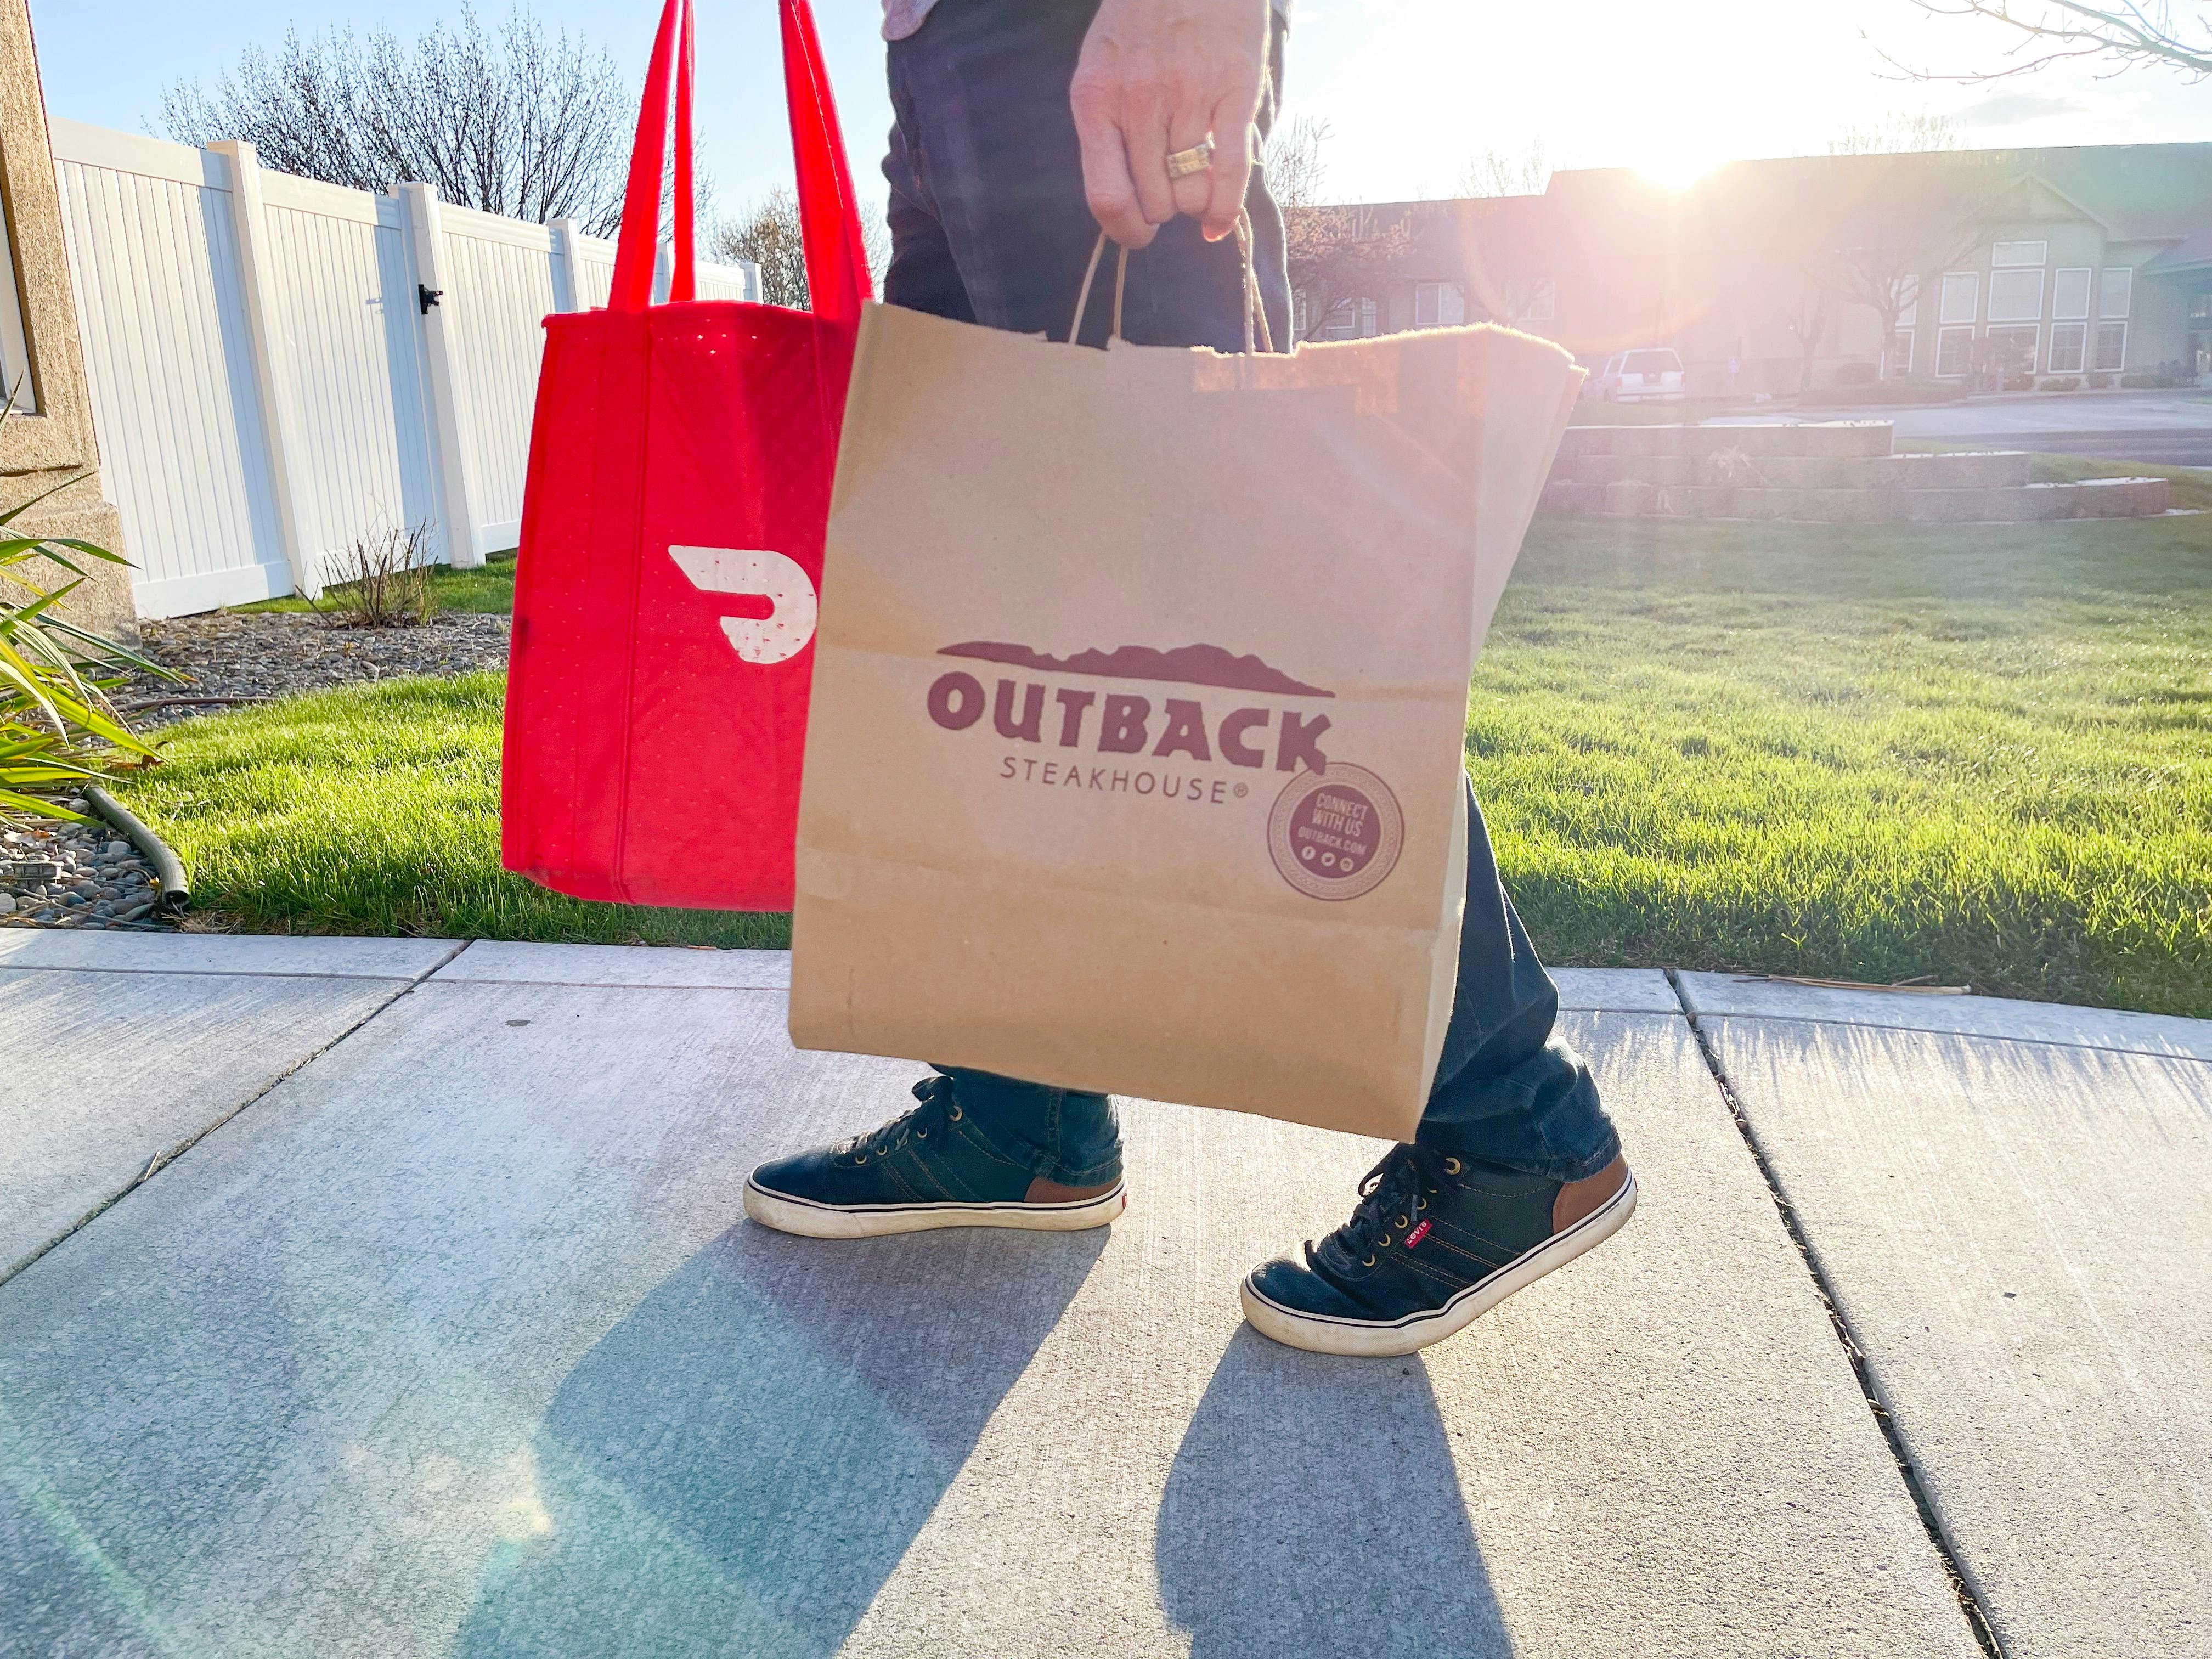 A person holding a DoorDash delivery bag and an Outback Steakhouse takeout bag walking down a sidewalk.